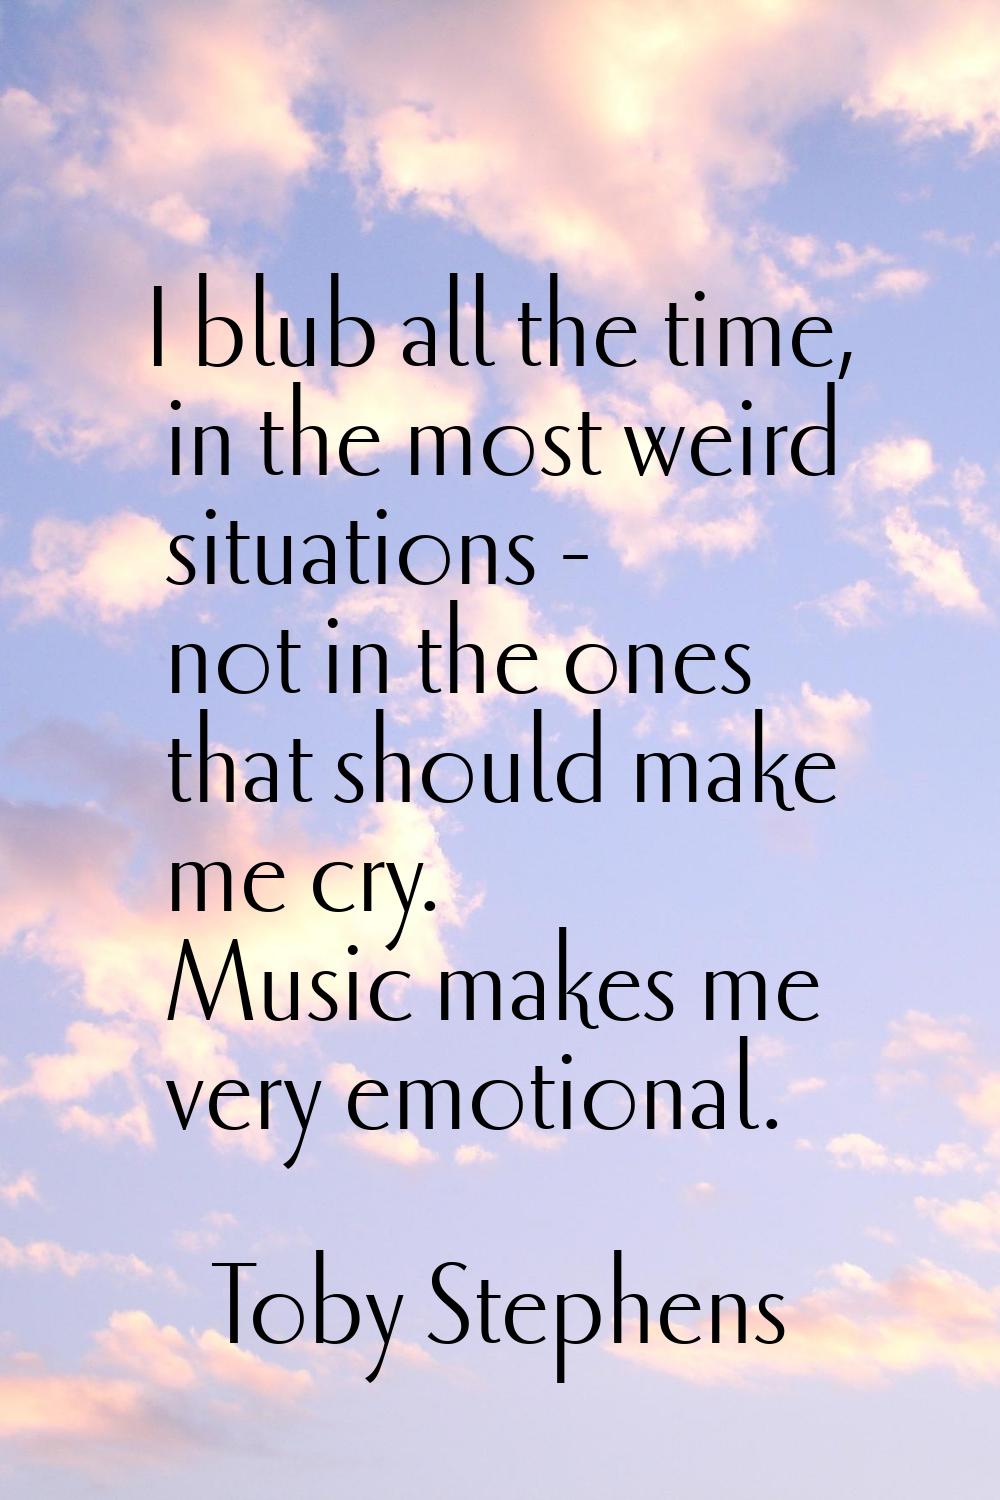 I blub all the time, in the most weird situations - not in the ones that should make me cry. Music 